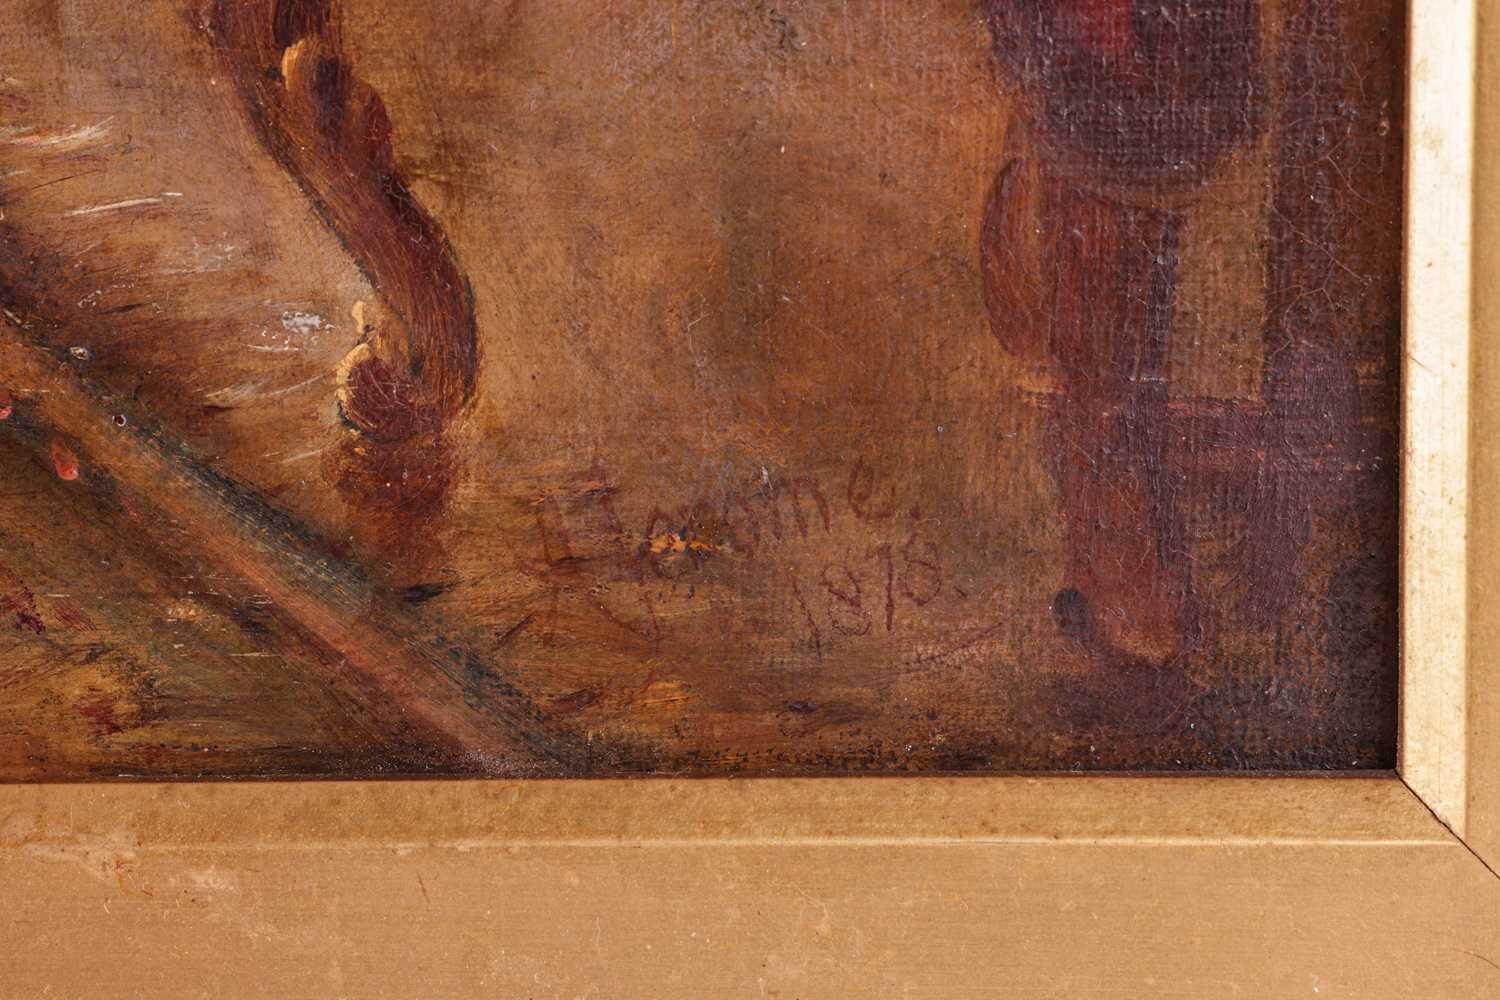 Ambrosini Jerome (1810 - 1883), The Letter, signed and dated 'A Jerome 1878' (lower right), oil on c - Image 12 of 12